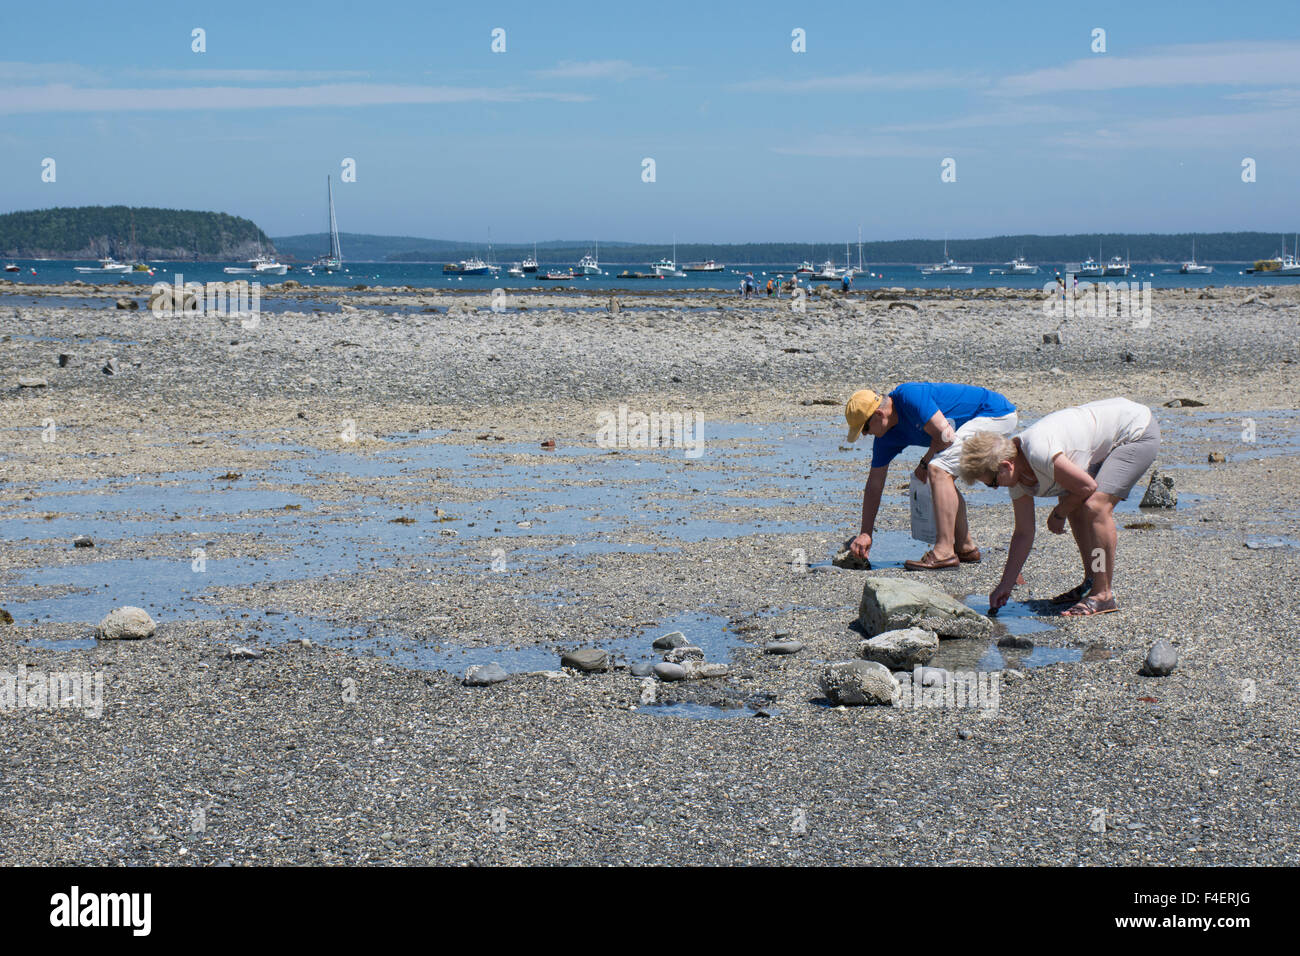 Maine, Bar Harbor. Bar Island, accessed only at low tide by a natural land bridge that emerges from the ocean. Beachcombers searching for shells on the Land Bridge at low tide. Stock Photo